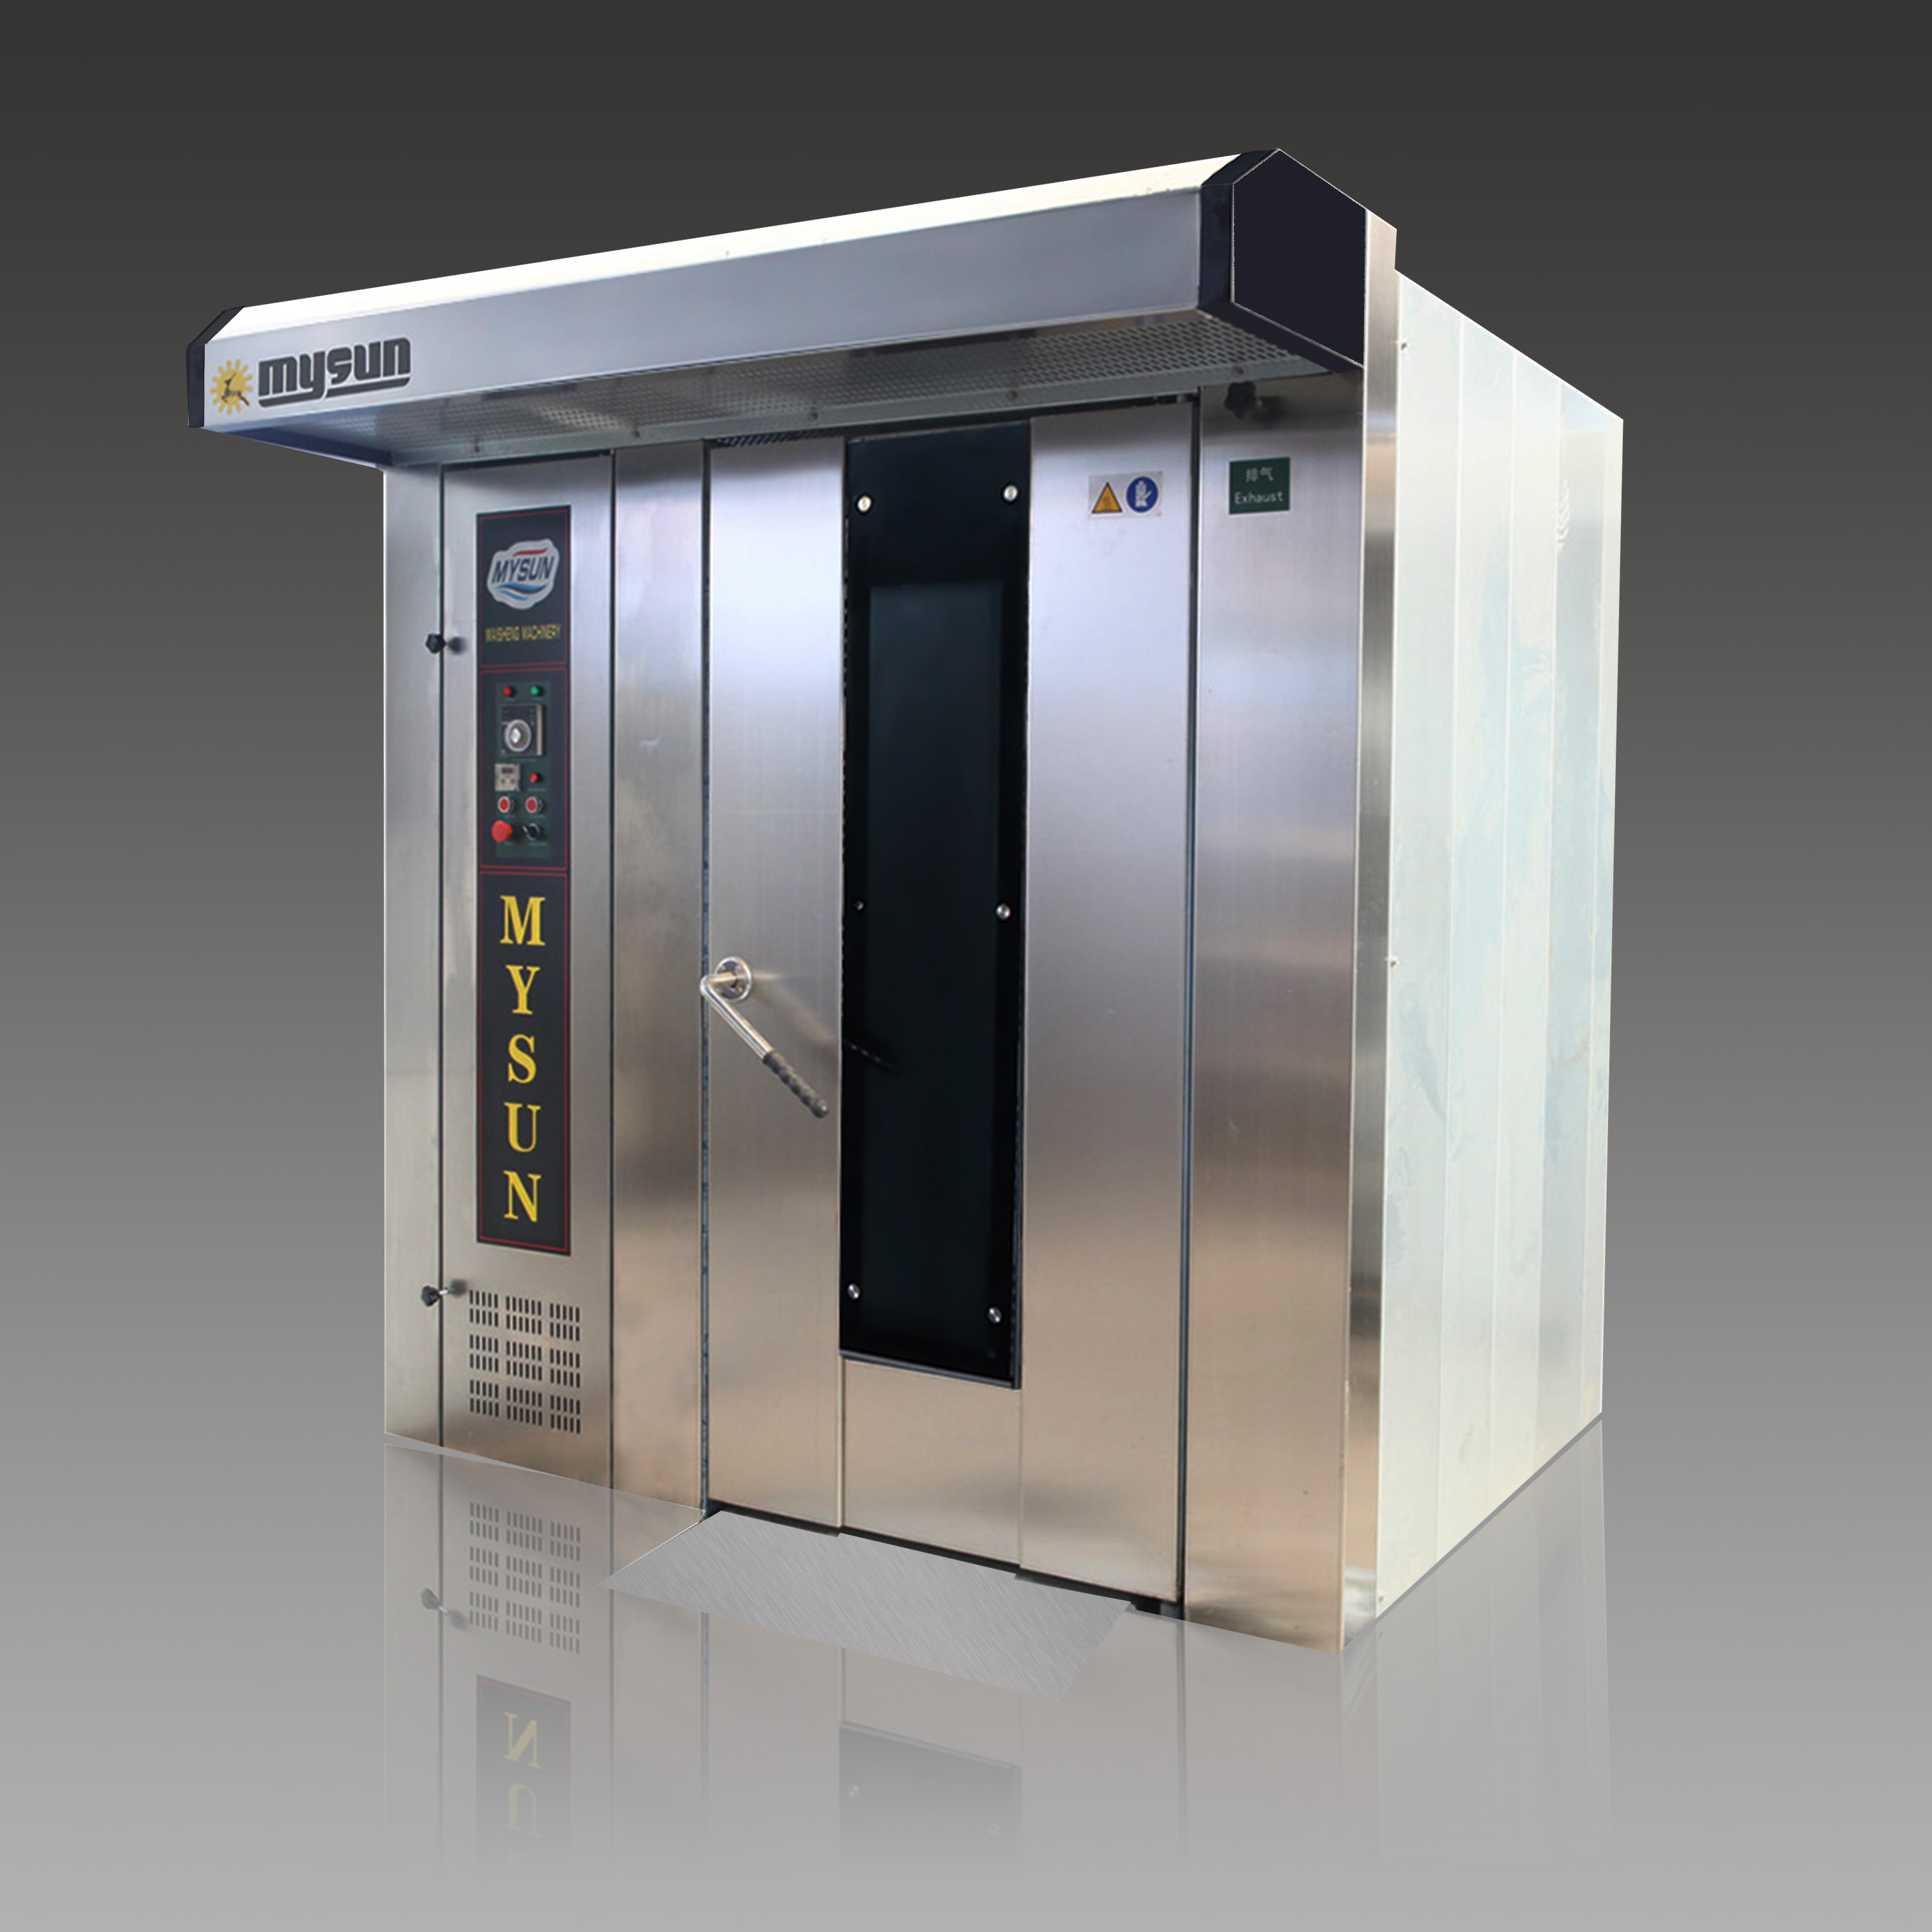 Something important about China rotary convection oven installation